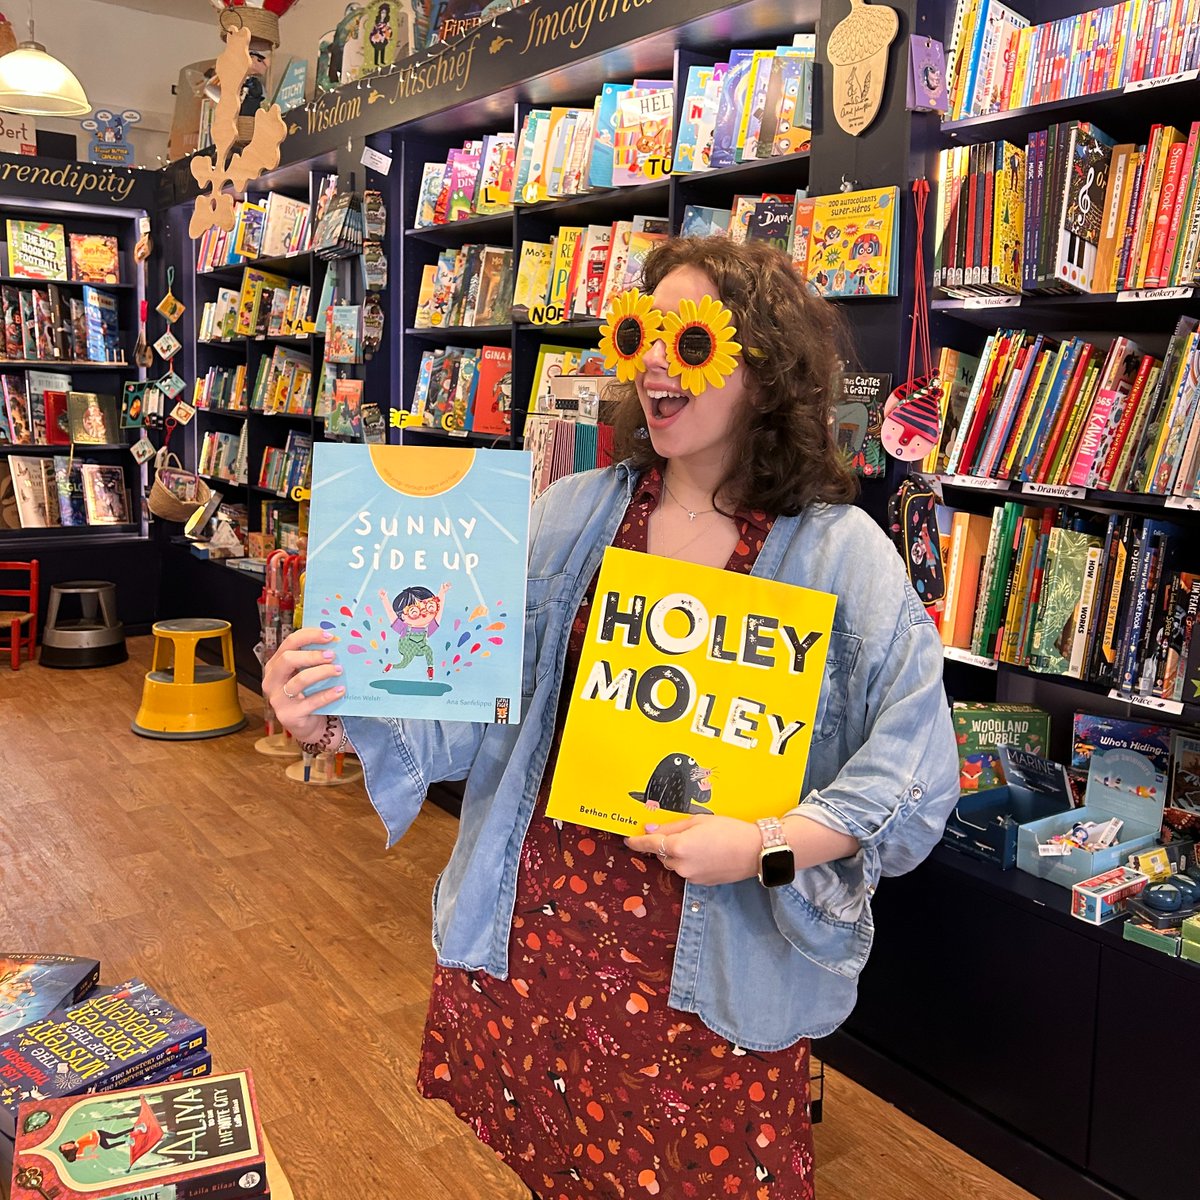 Perfect Picture Books! We love these new arrivals in the children's section - guaranteed to make you smile! Sunny Side Up by Clare Helen Walsh & Holey Moley by Bethan Clark